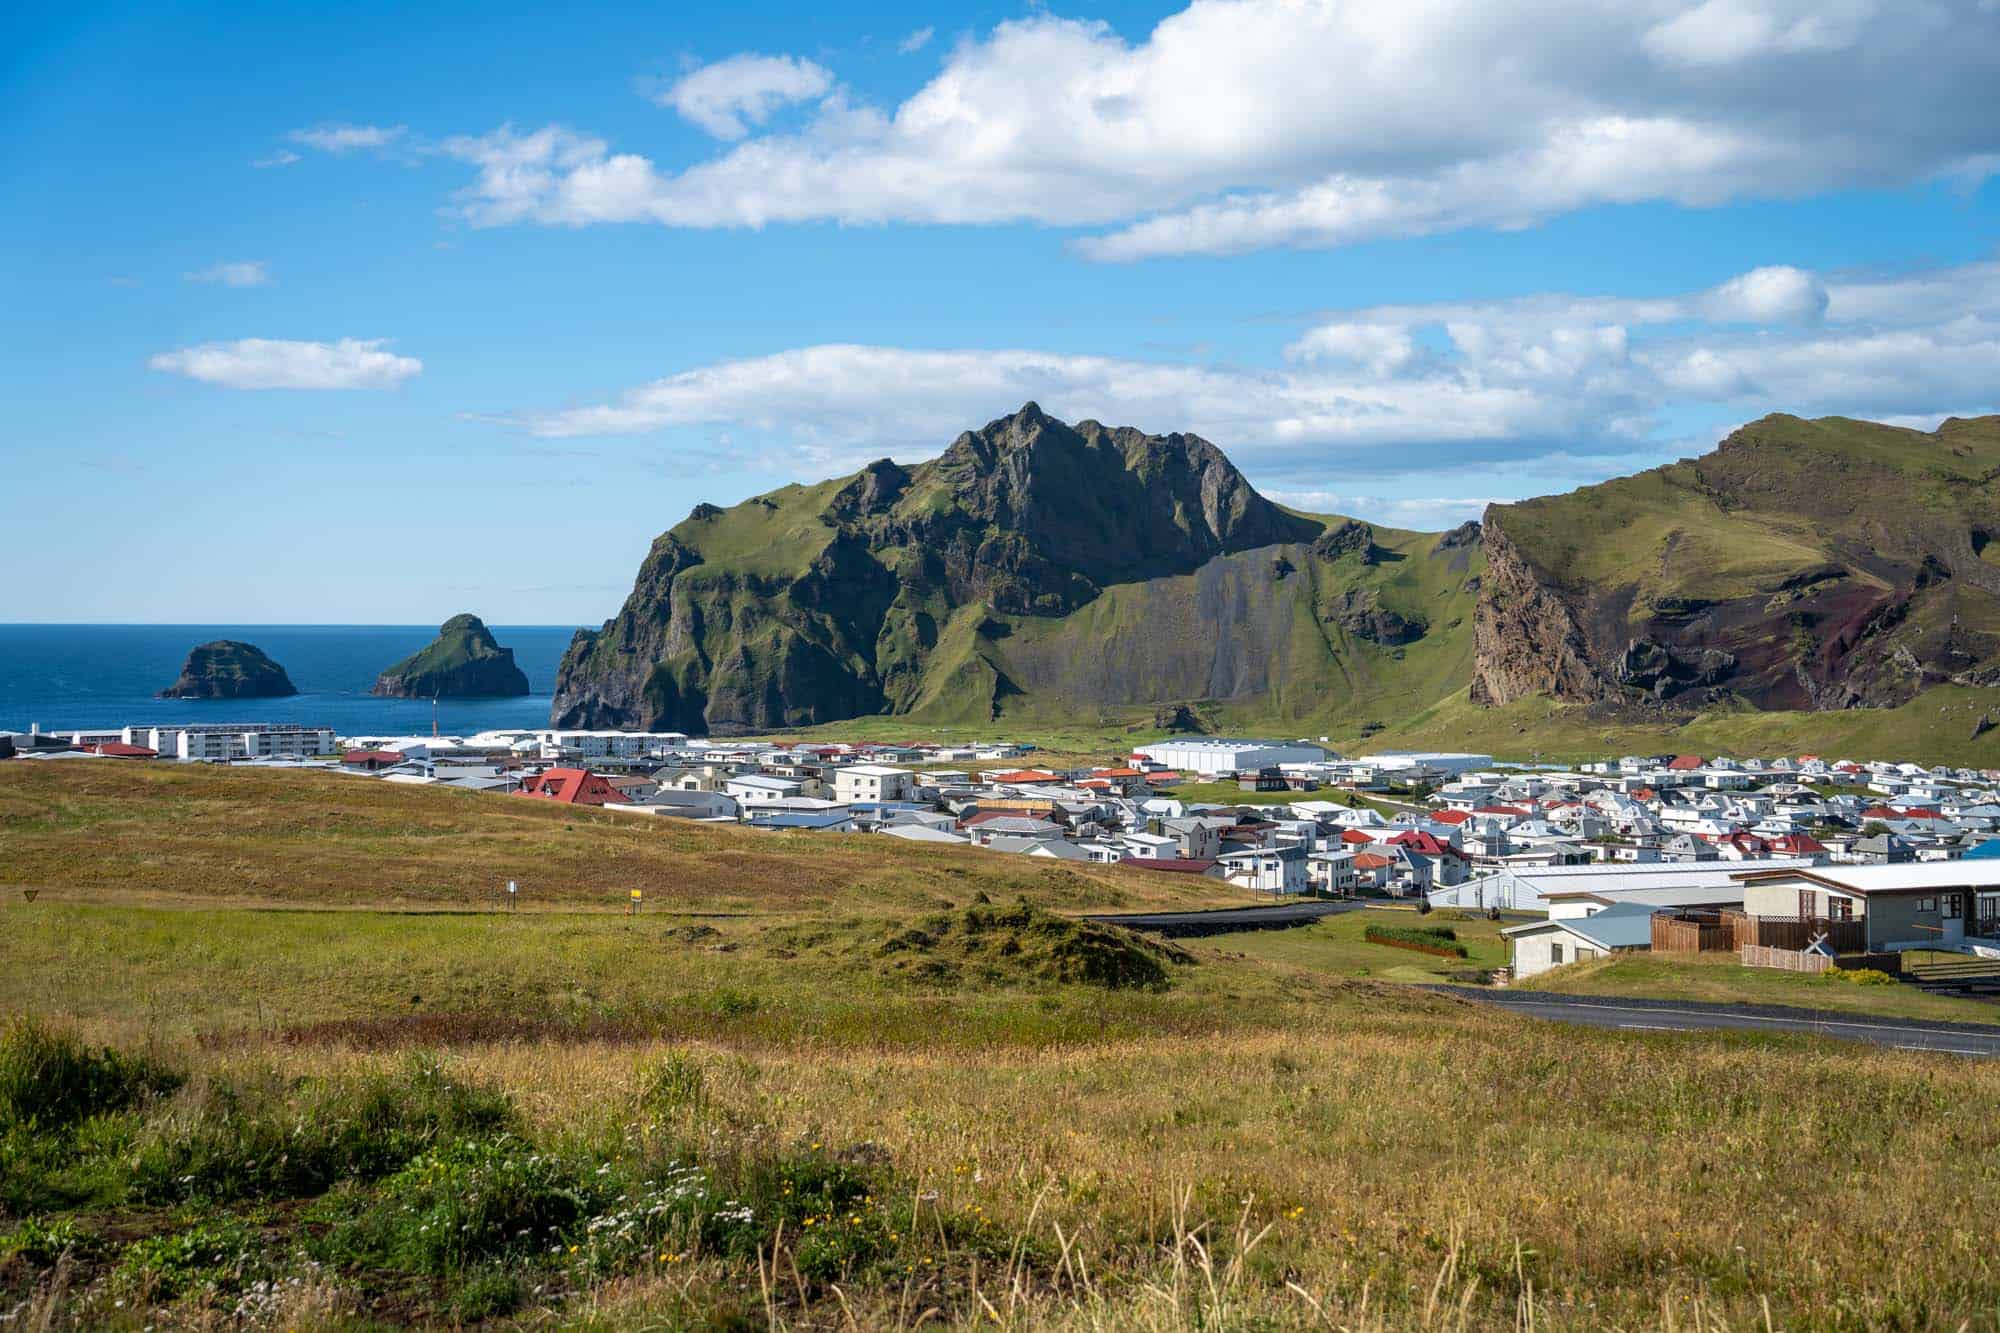 1 Day in the Westman Islands: Things to Do on Heimaey Island in Iceland